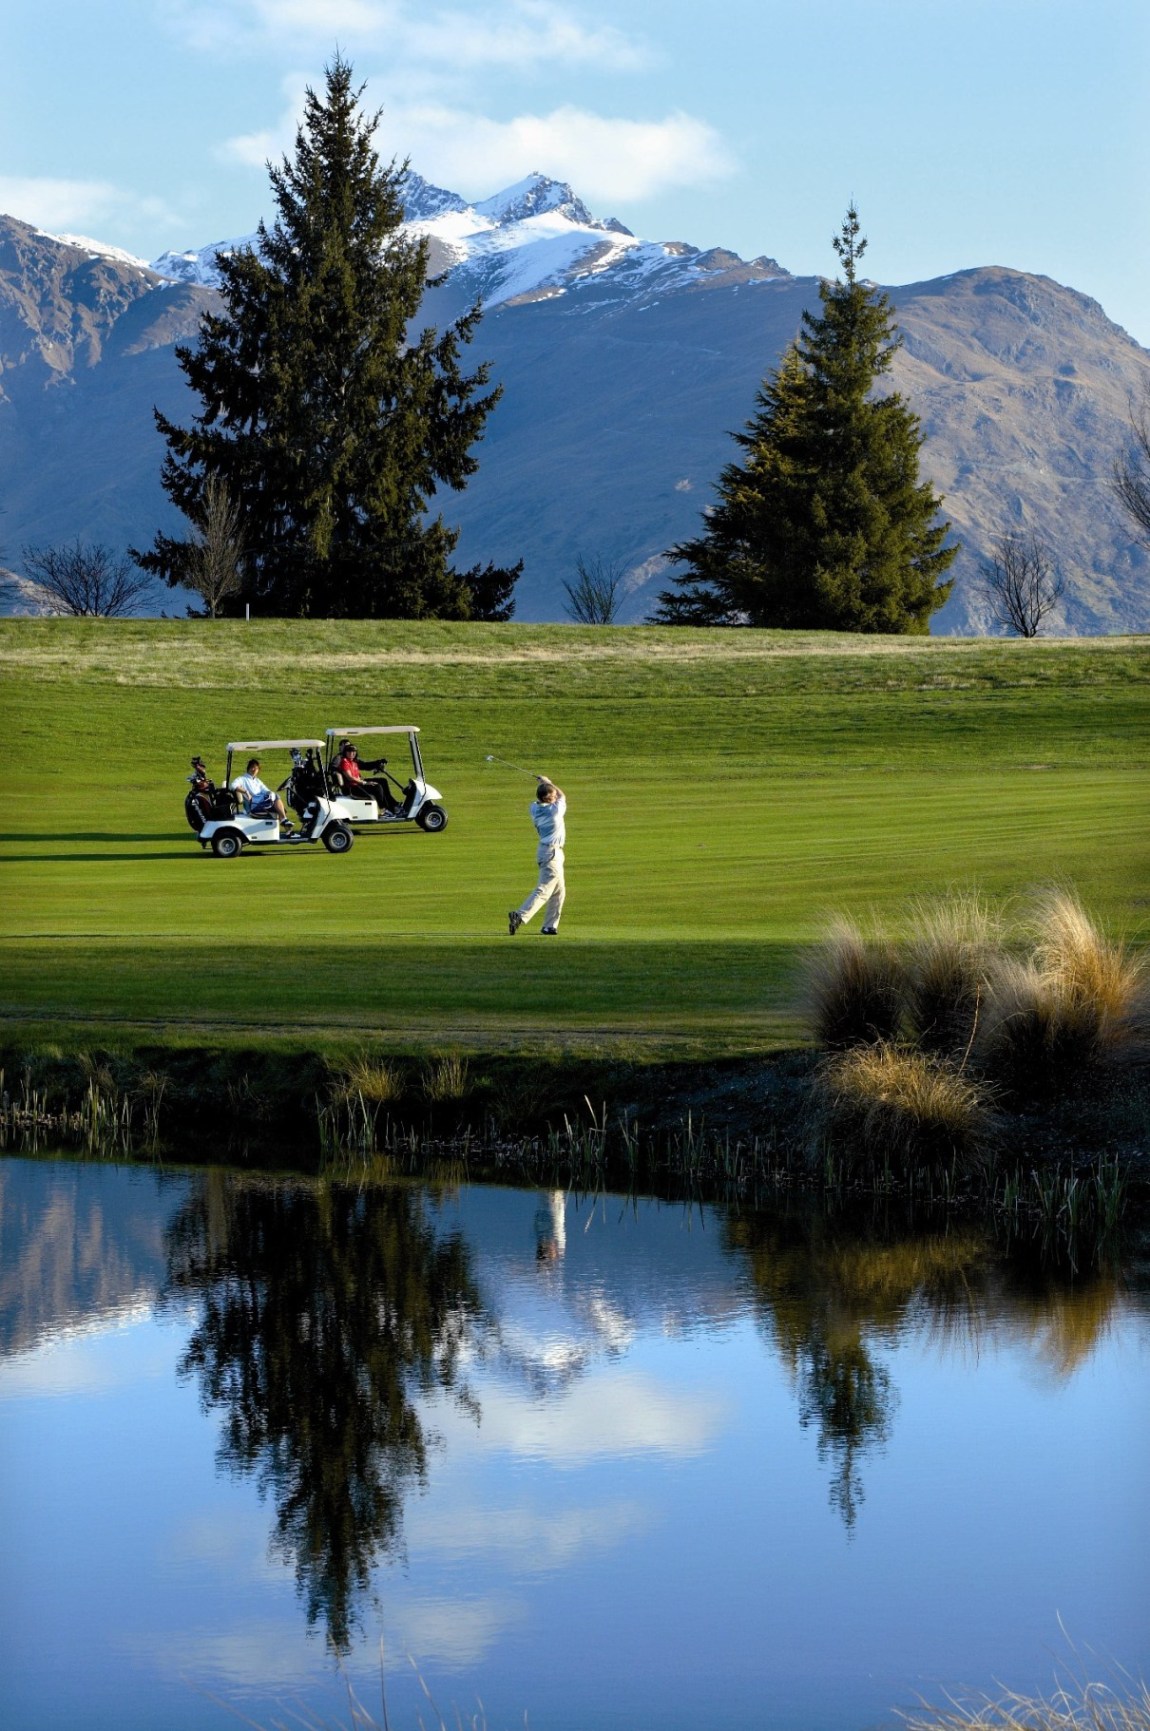 Surrounded by mountains Millbrook Resort is a golfers dream med res -